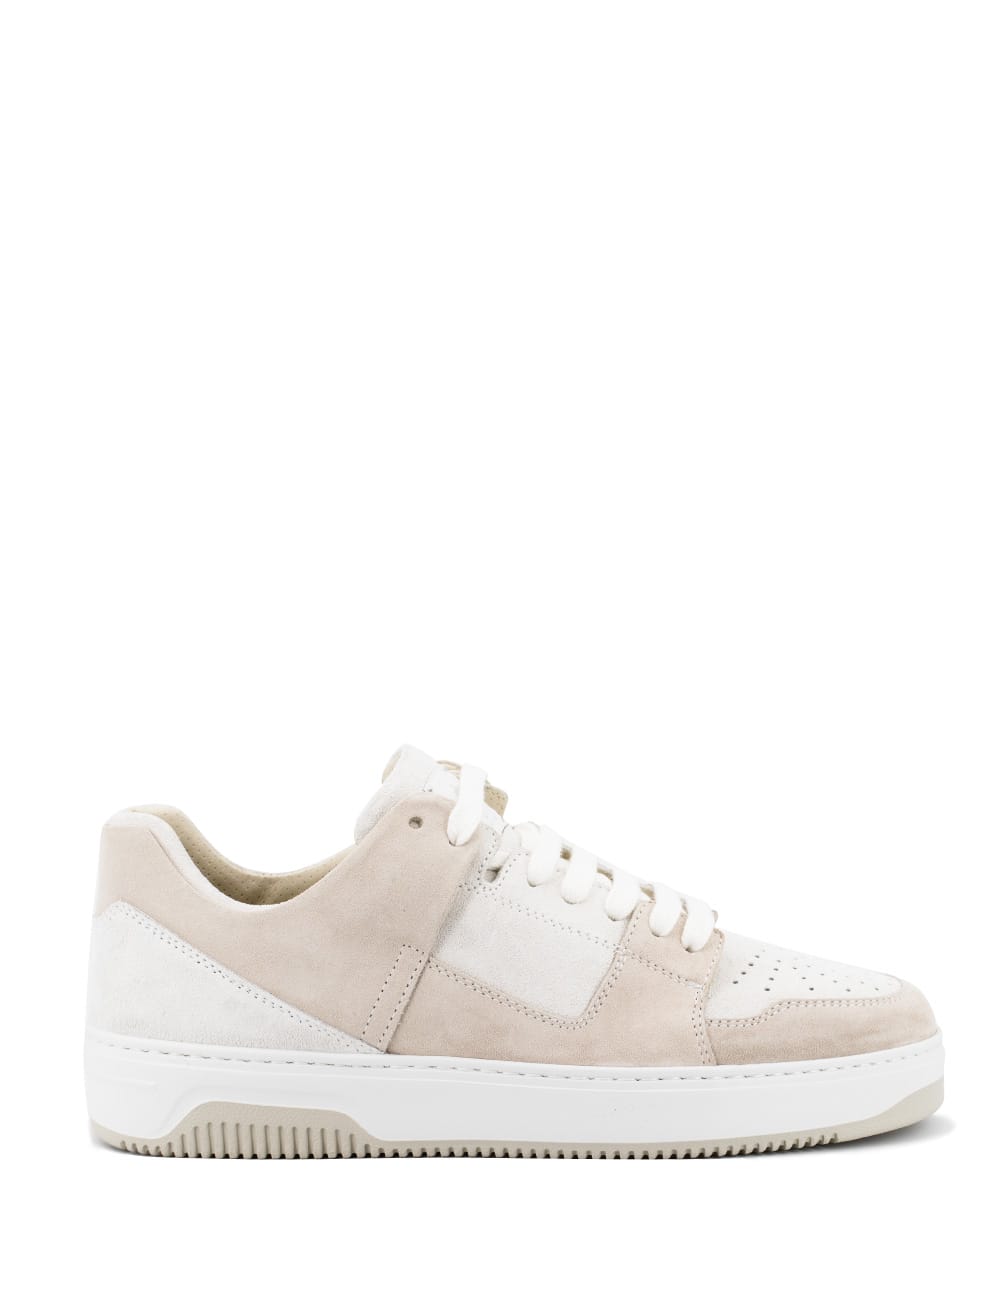 Eleventy Trainers In Sand And White